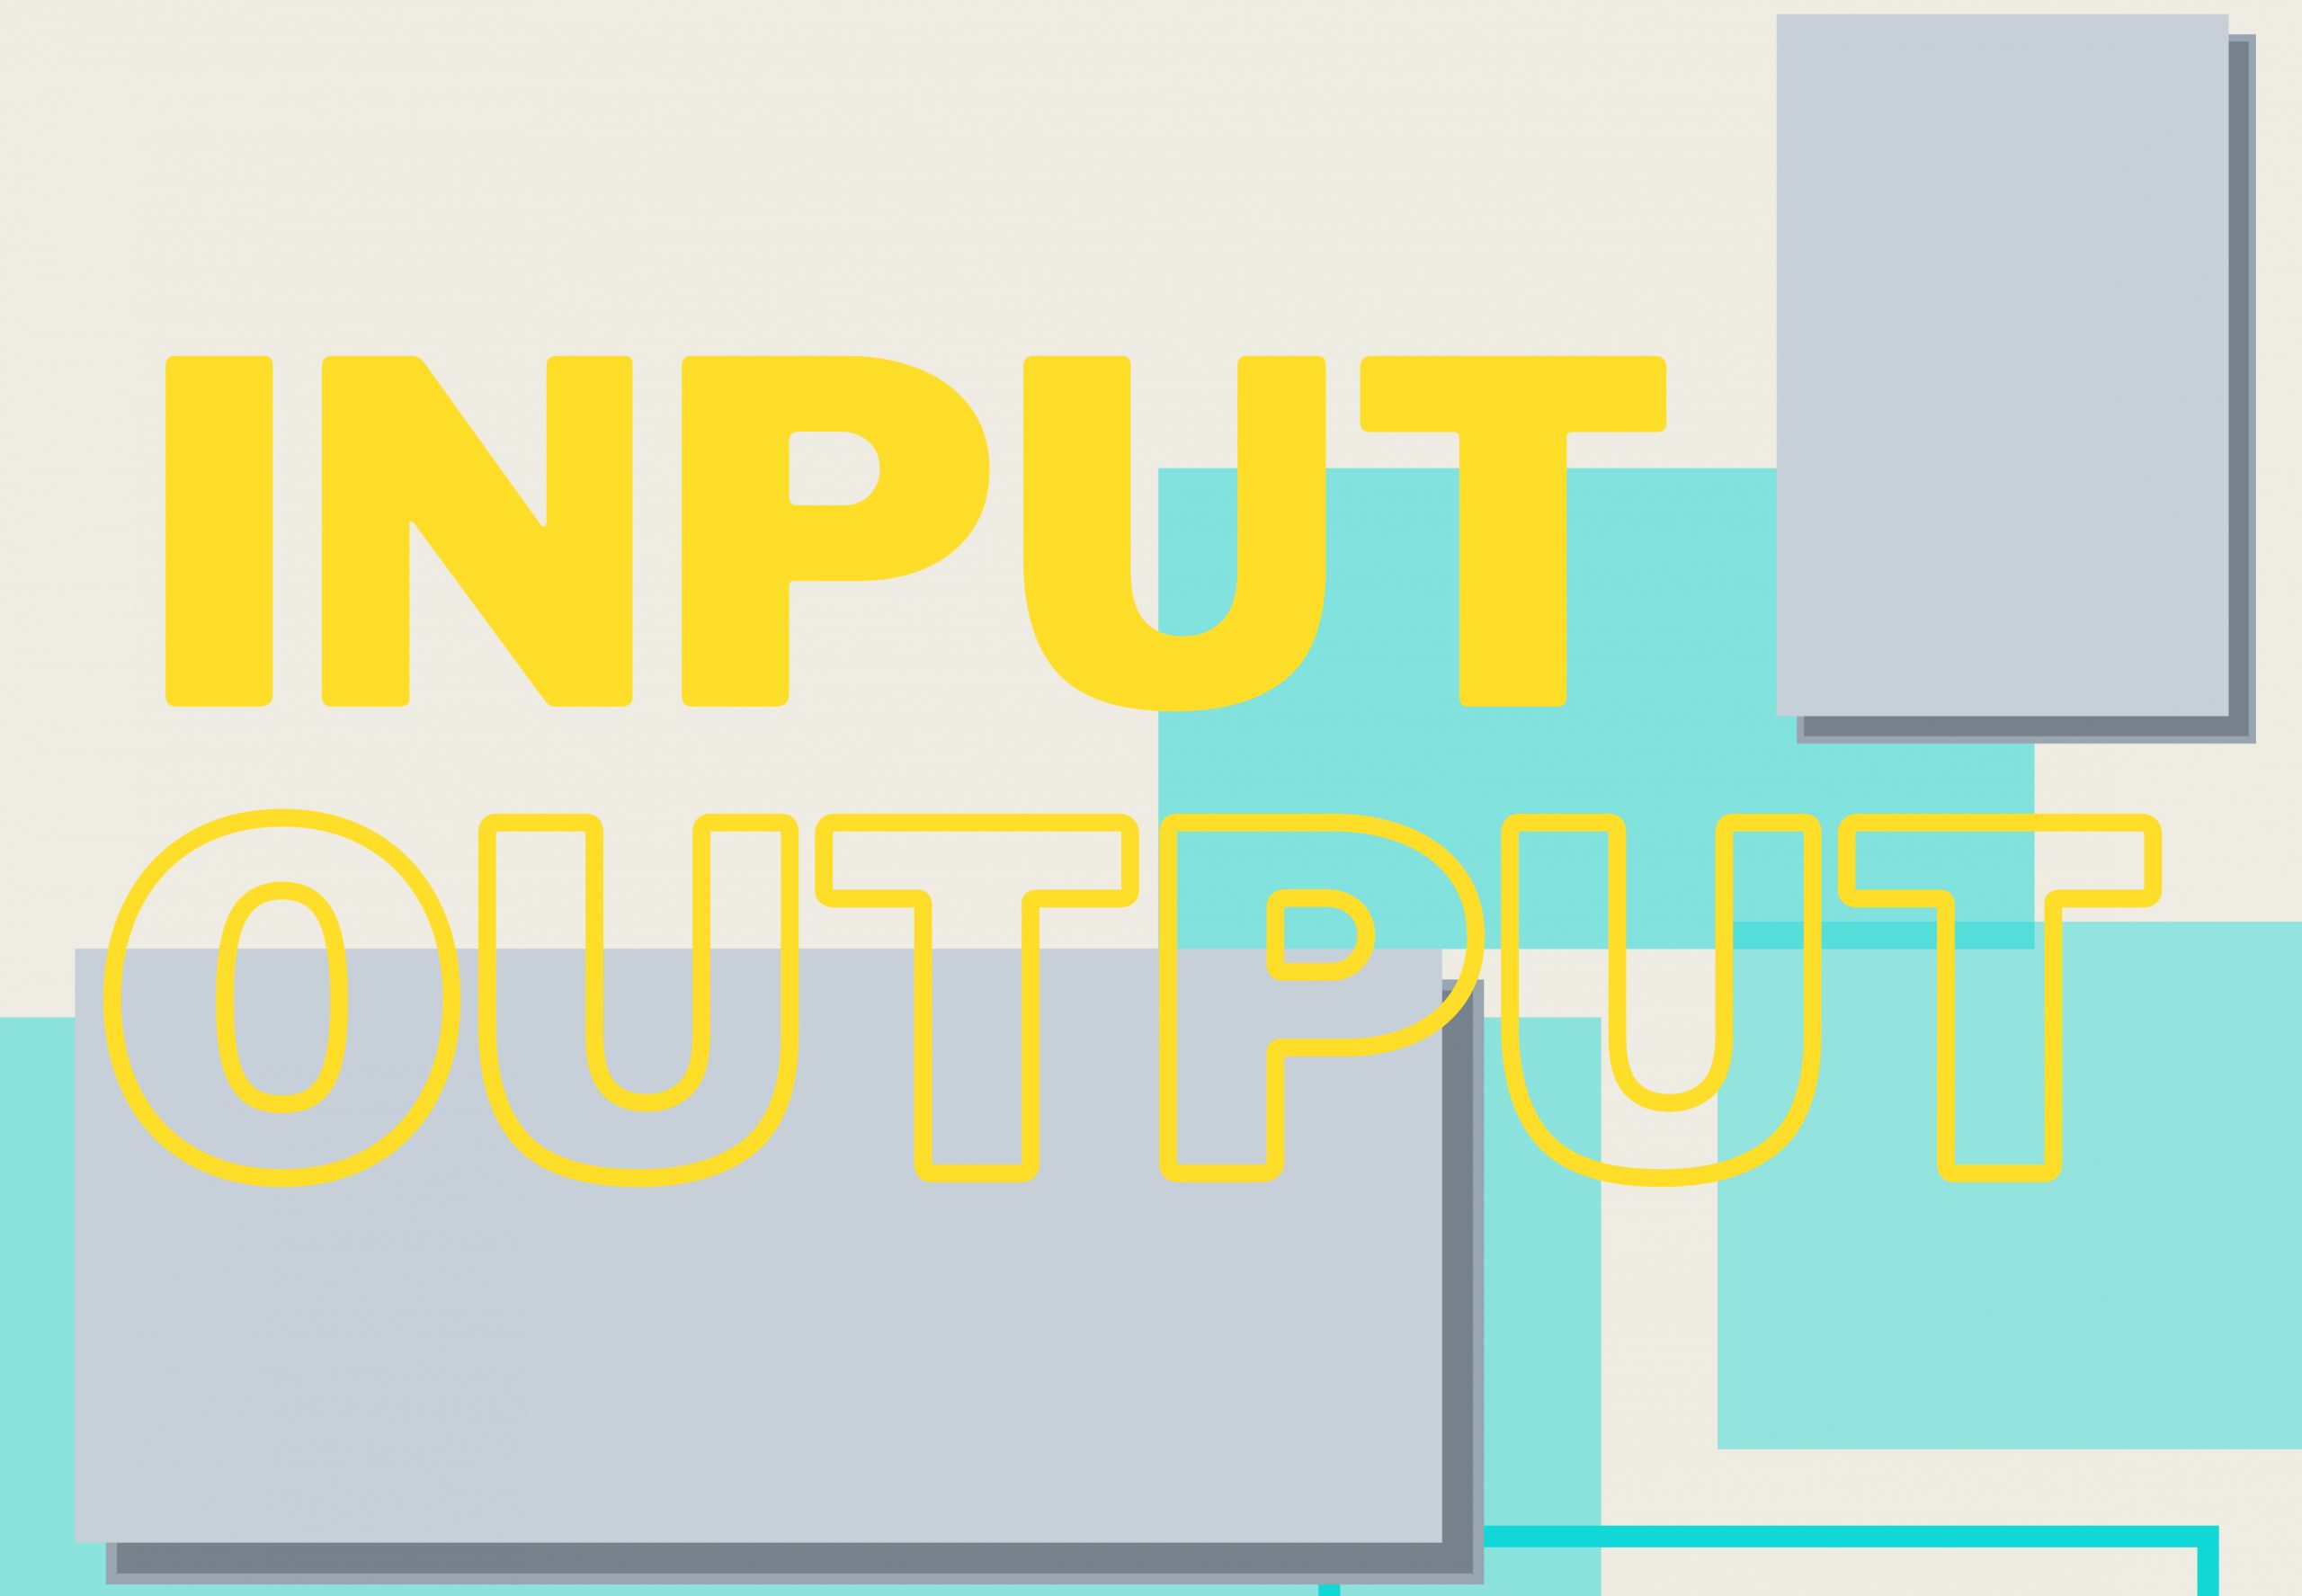 Lobby: INPUT OUTPUT Publication as Exhibition